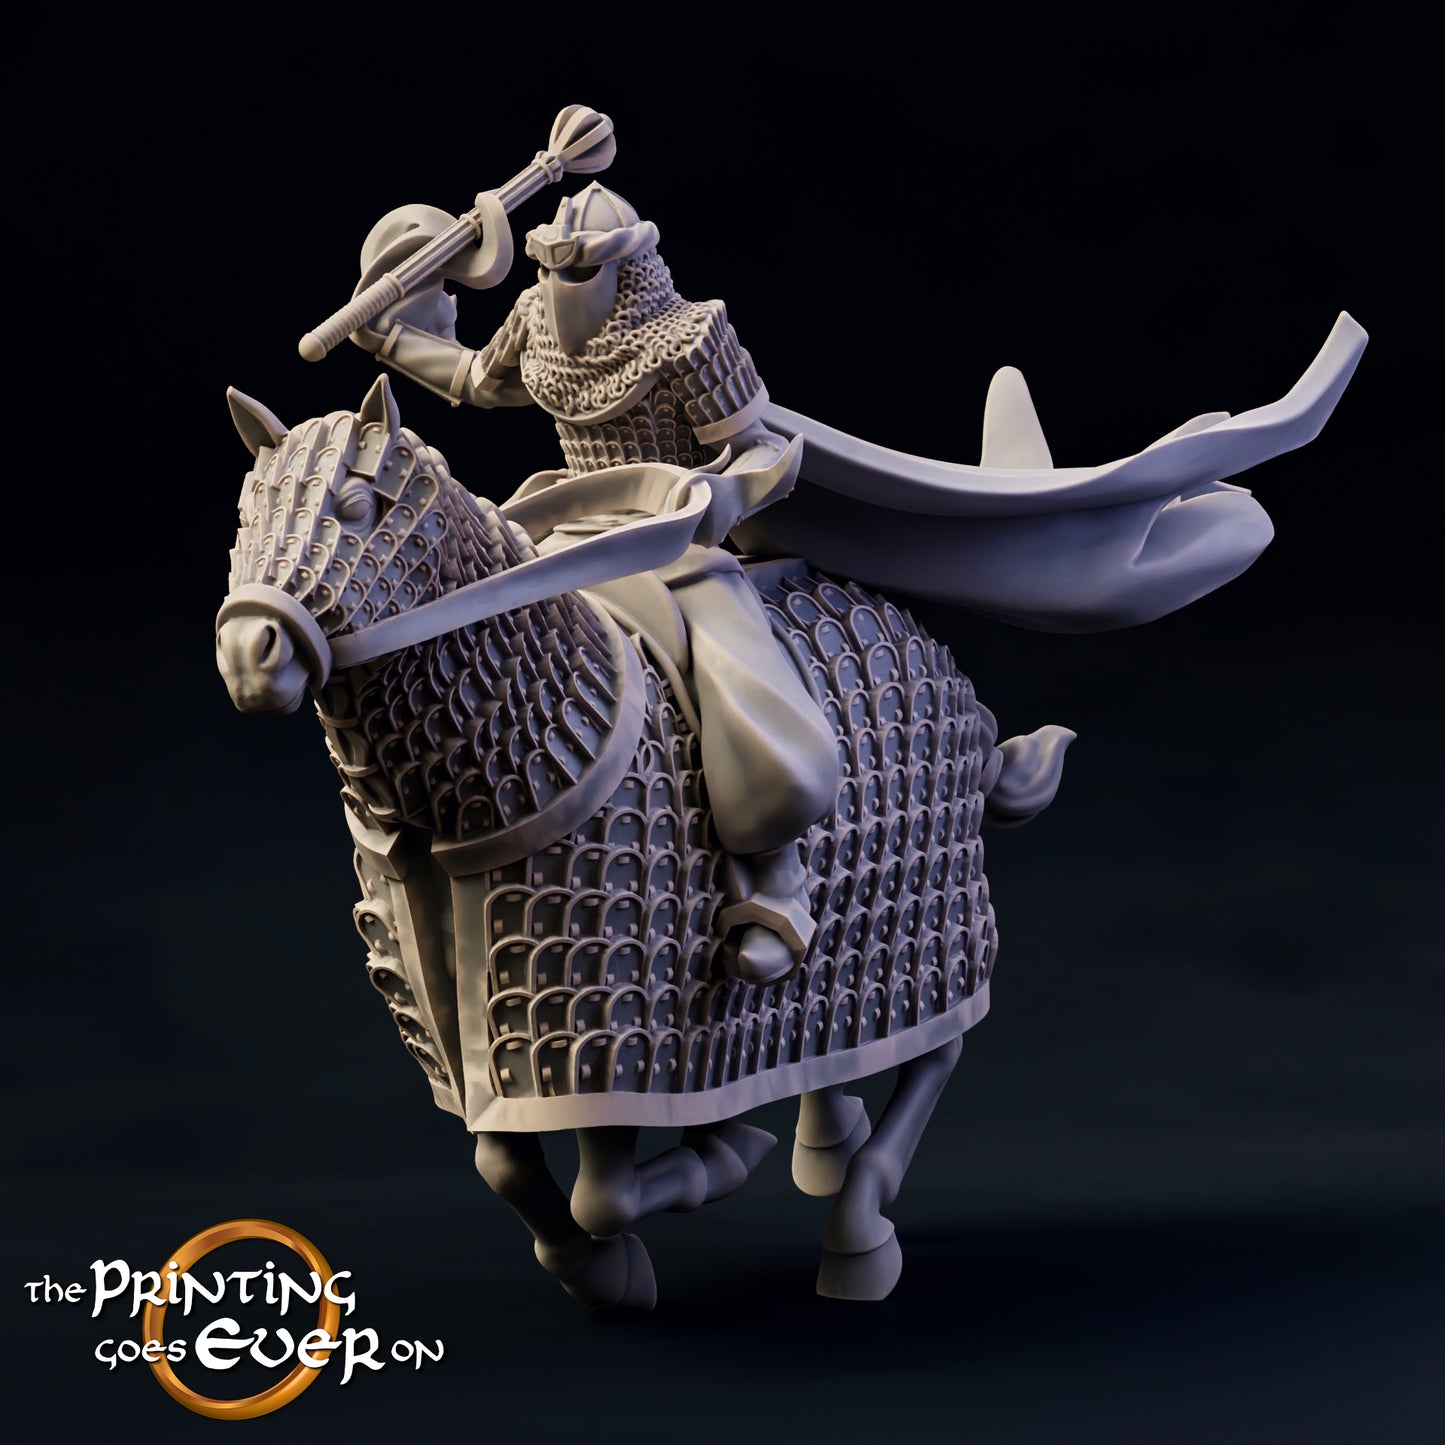 Dark Cataphract by The Printing Goes Ever On